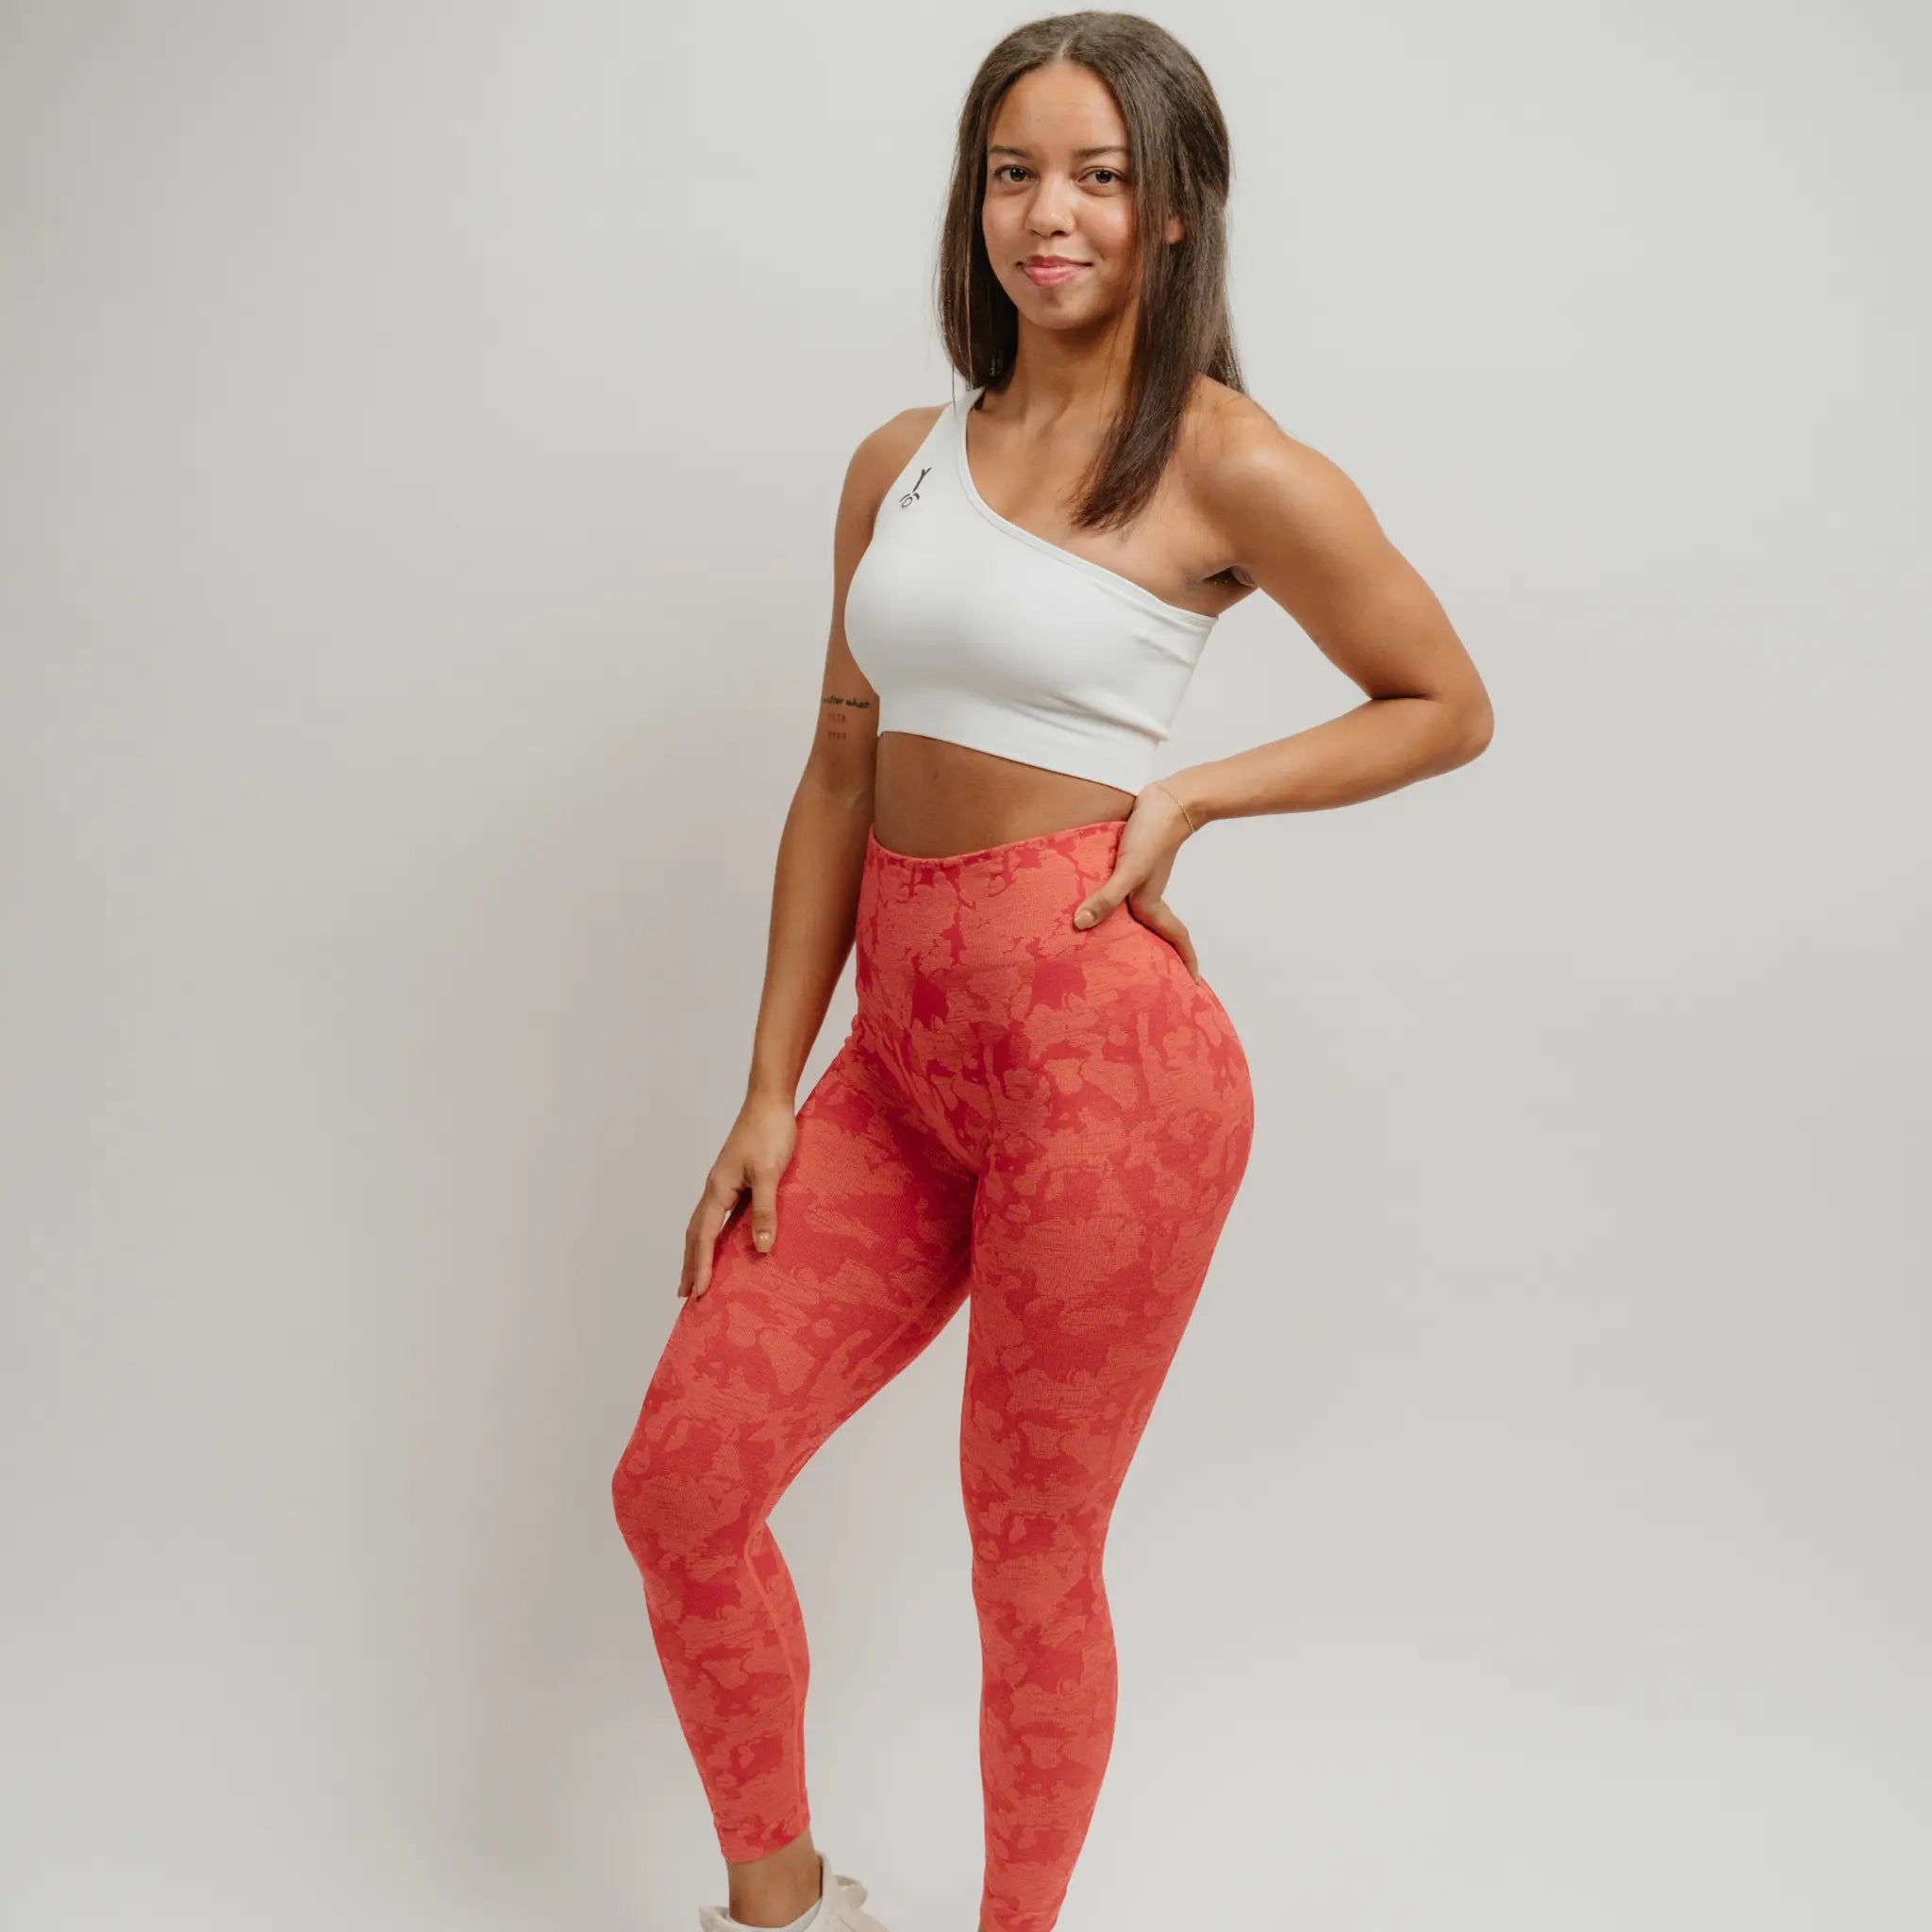 Camo leggings that also have a scrunch